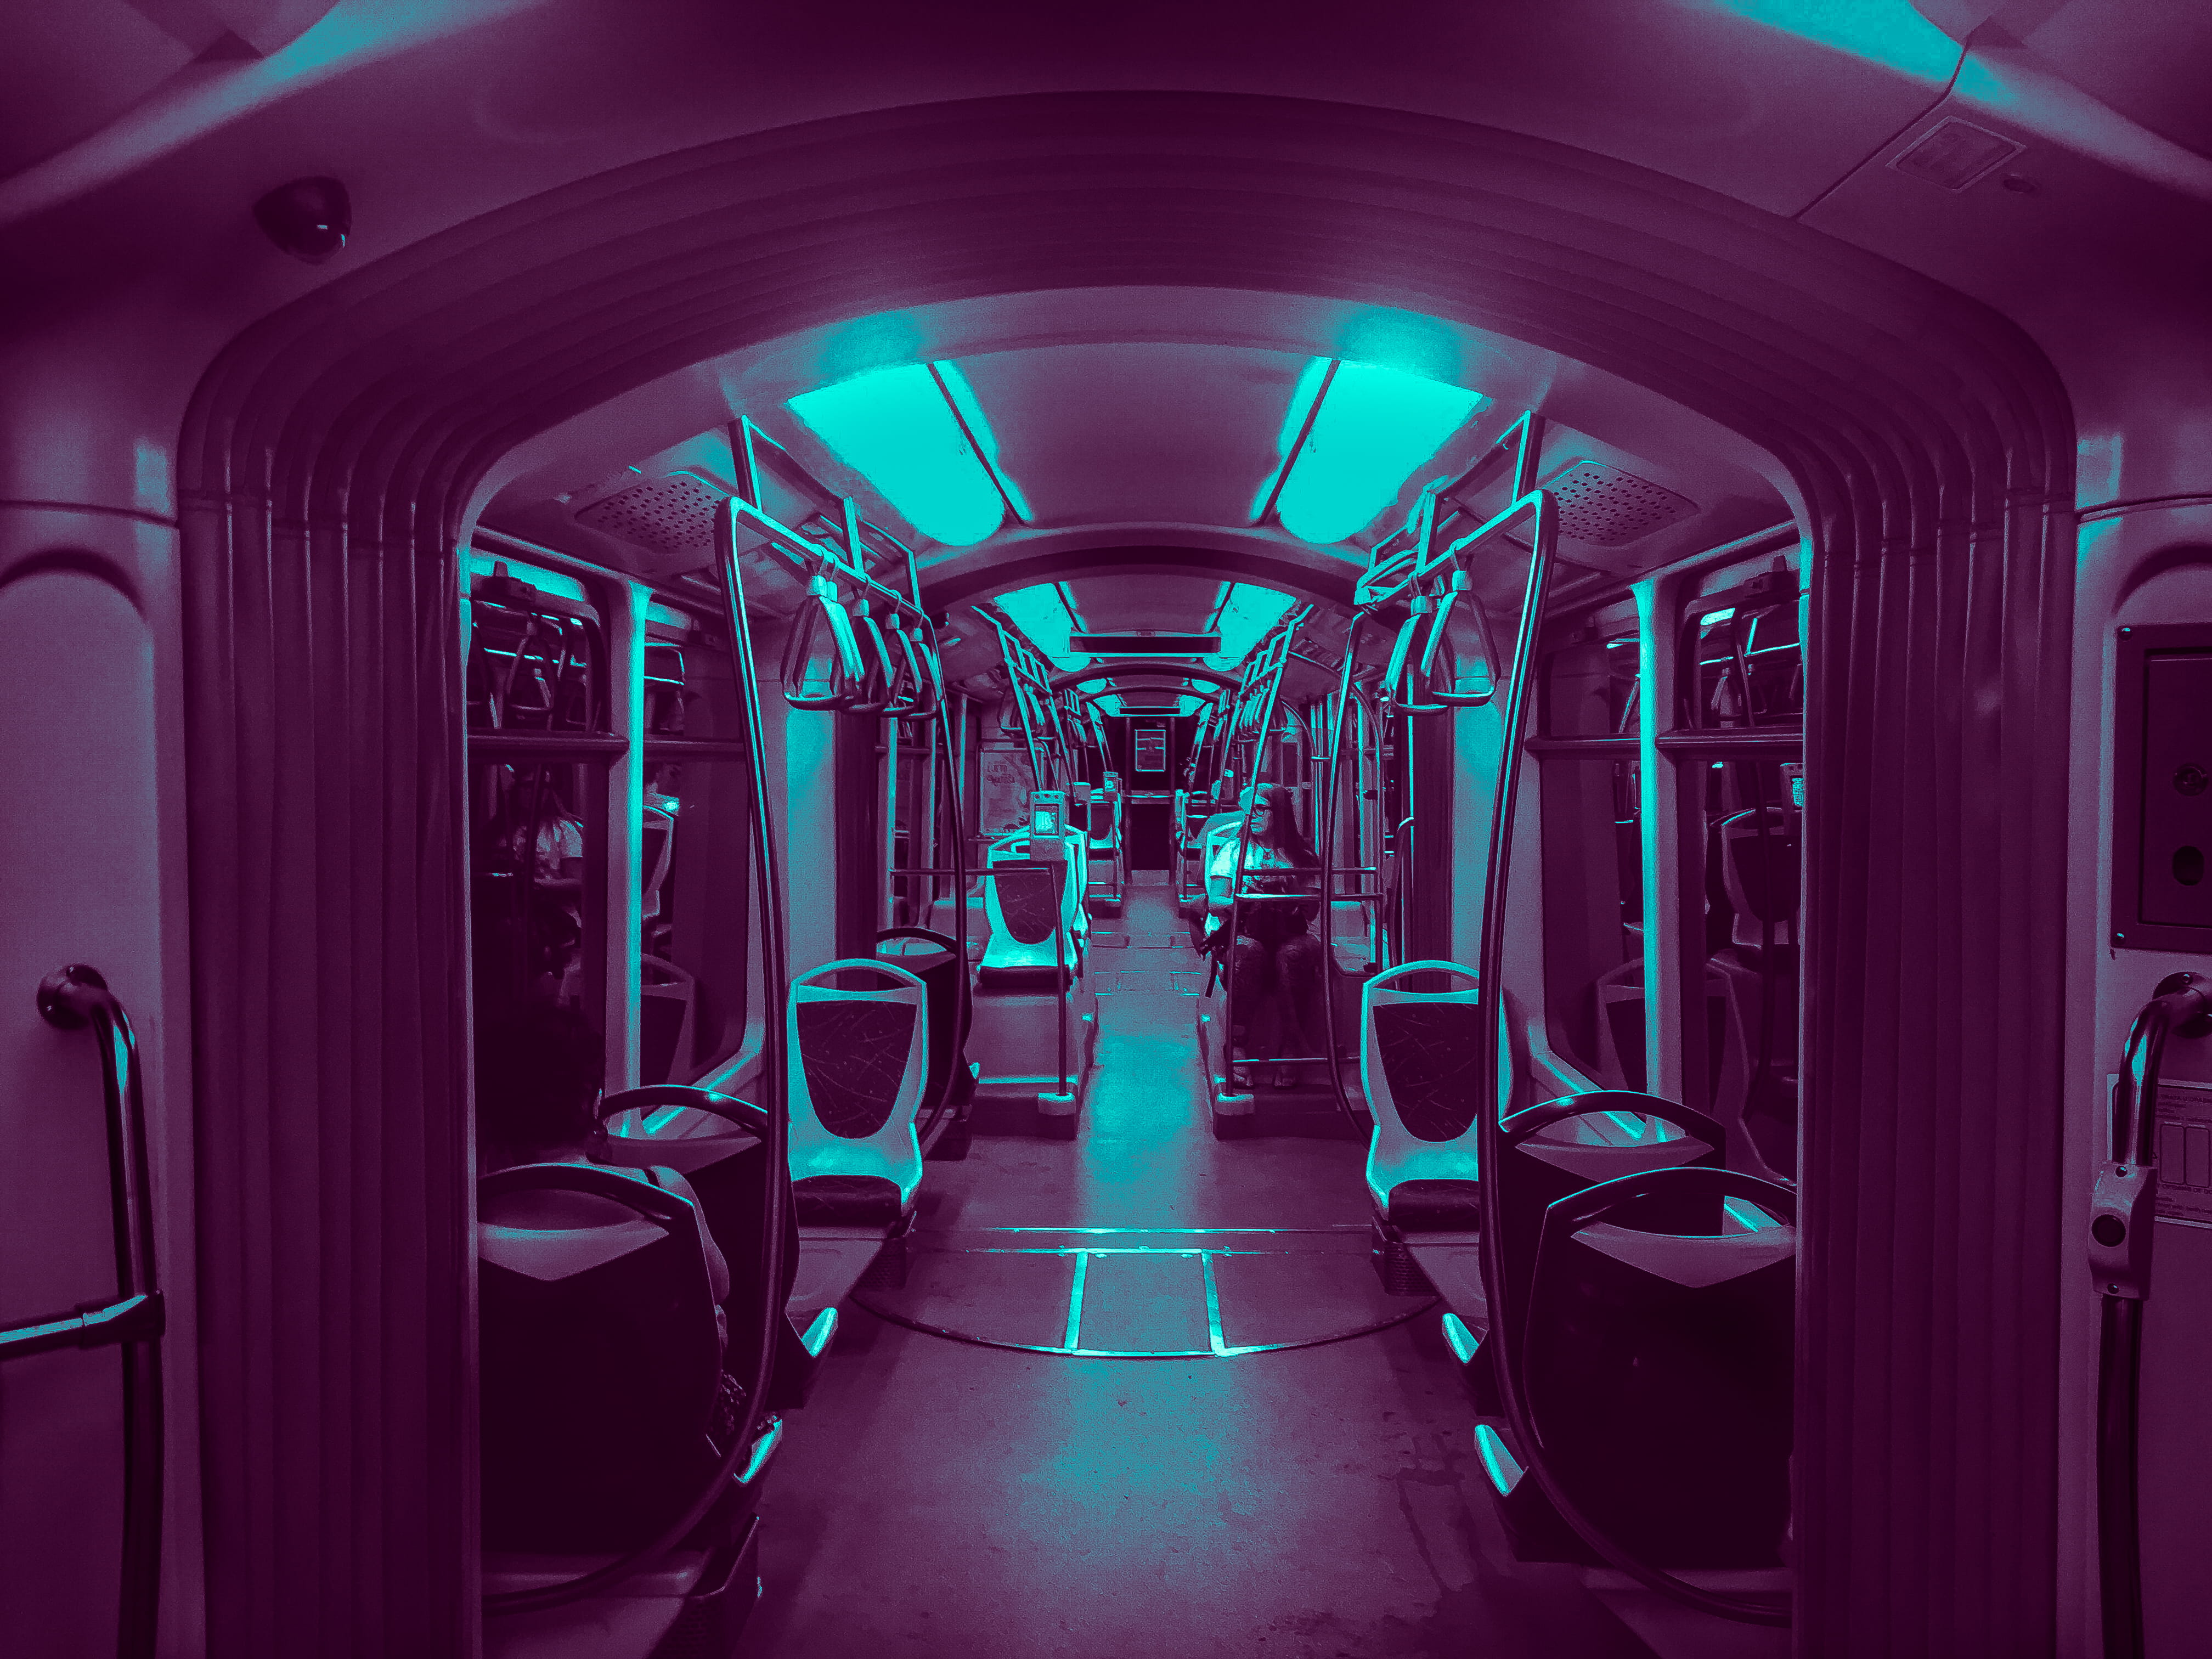 interior photo of train with lights, chair, seat, solitude, alone